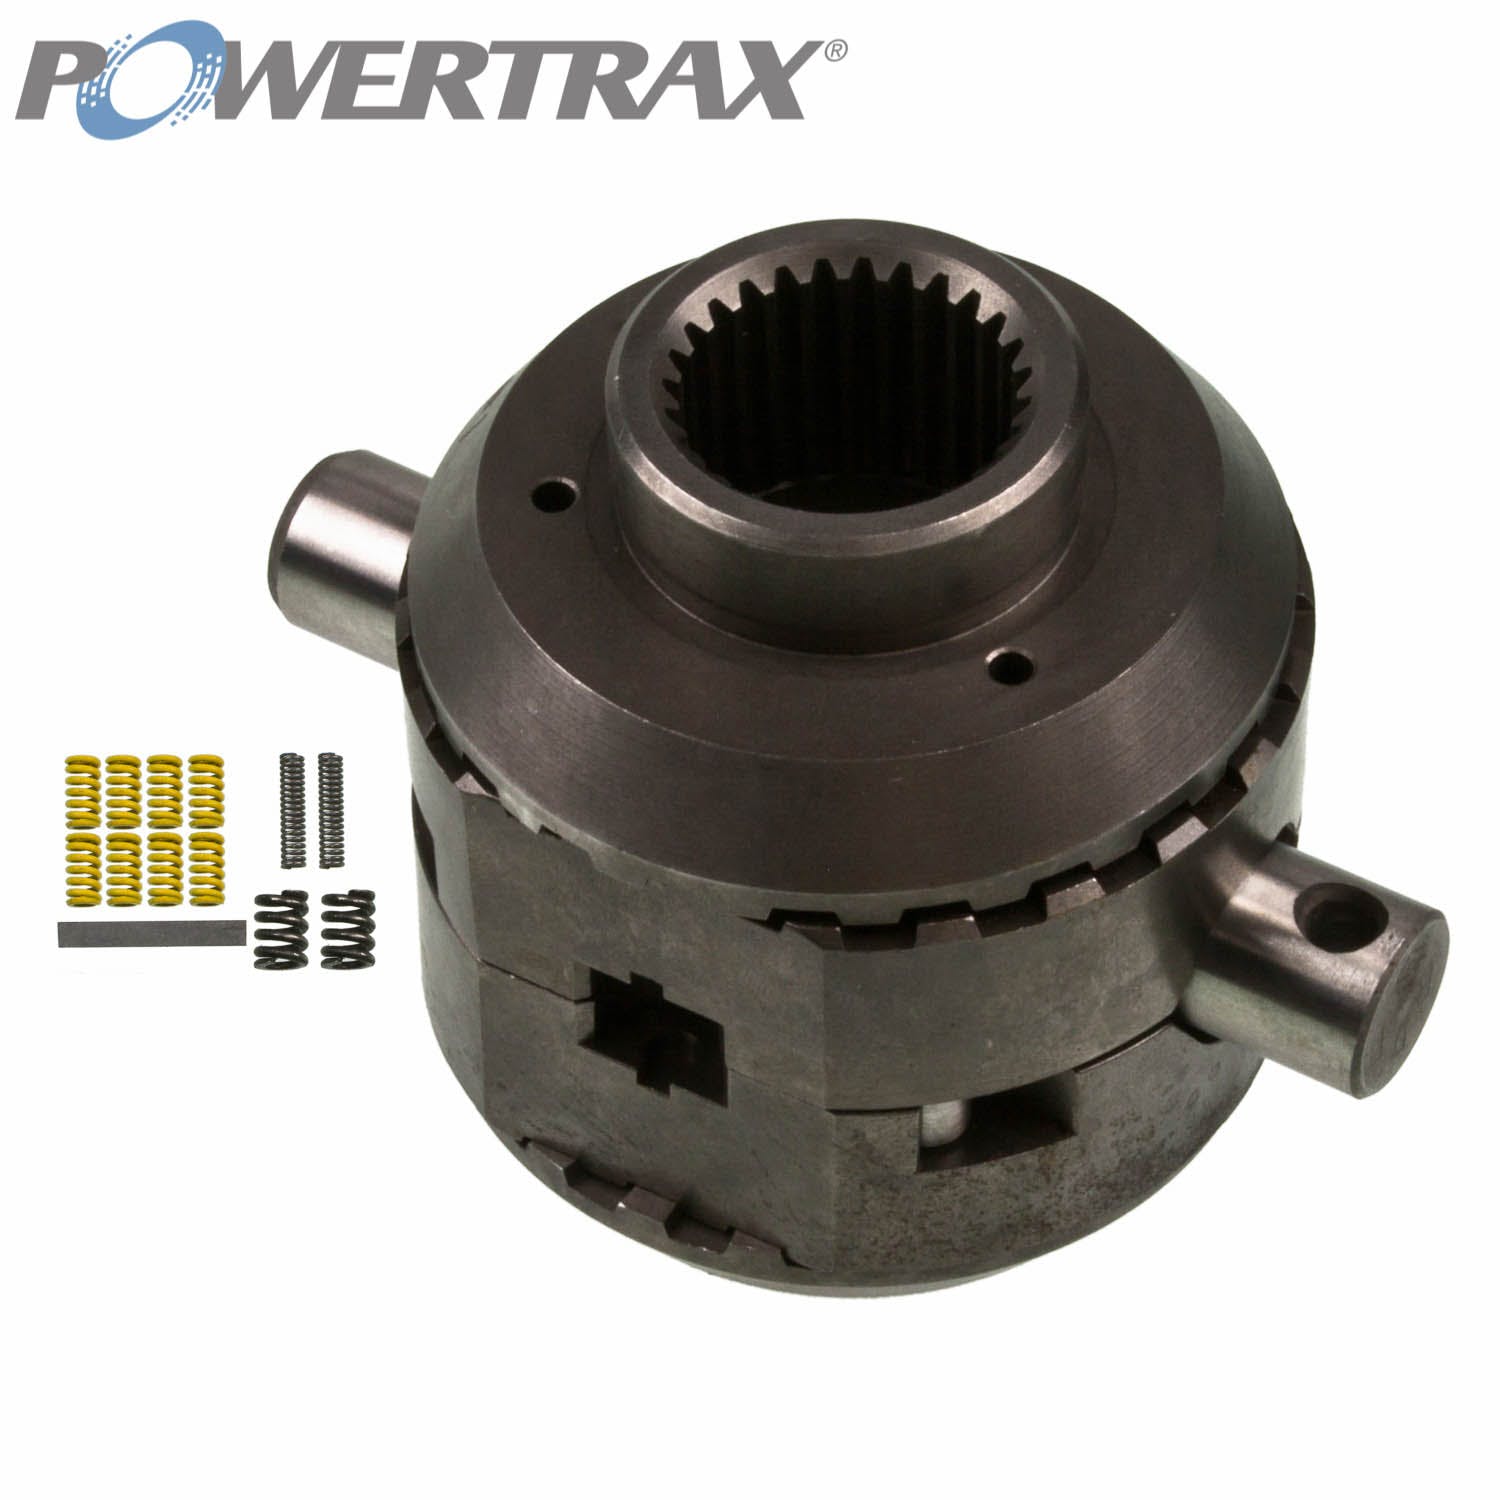 PowerTrax 9204302700 No-Slip Traction System